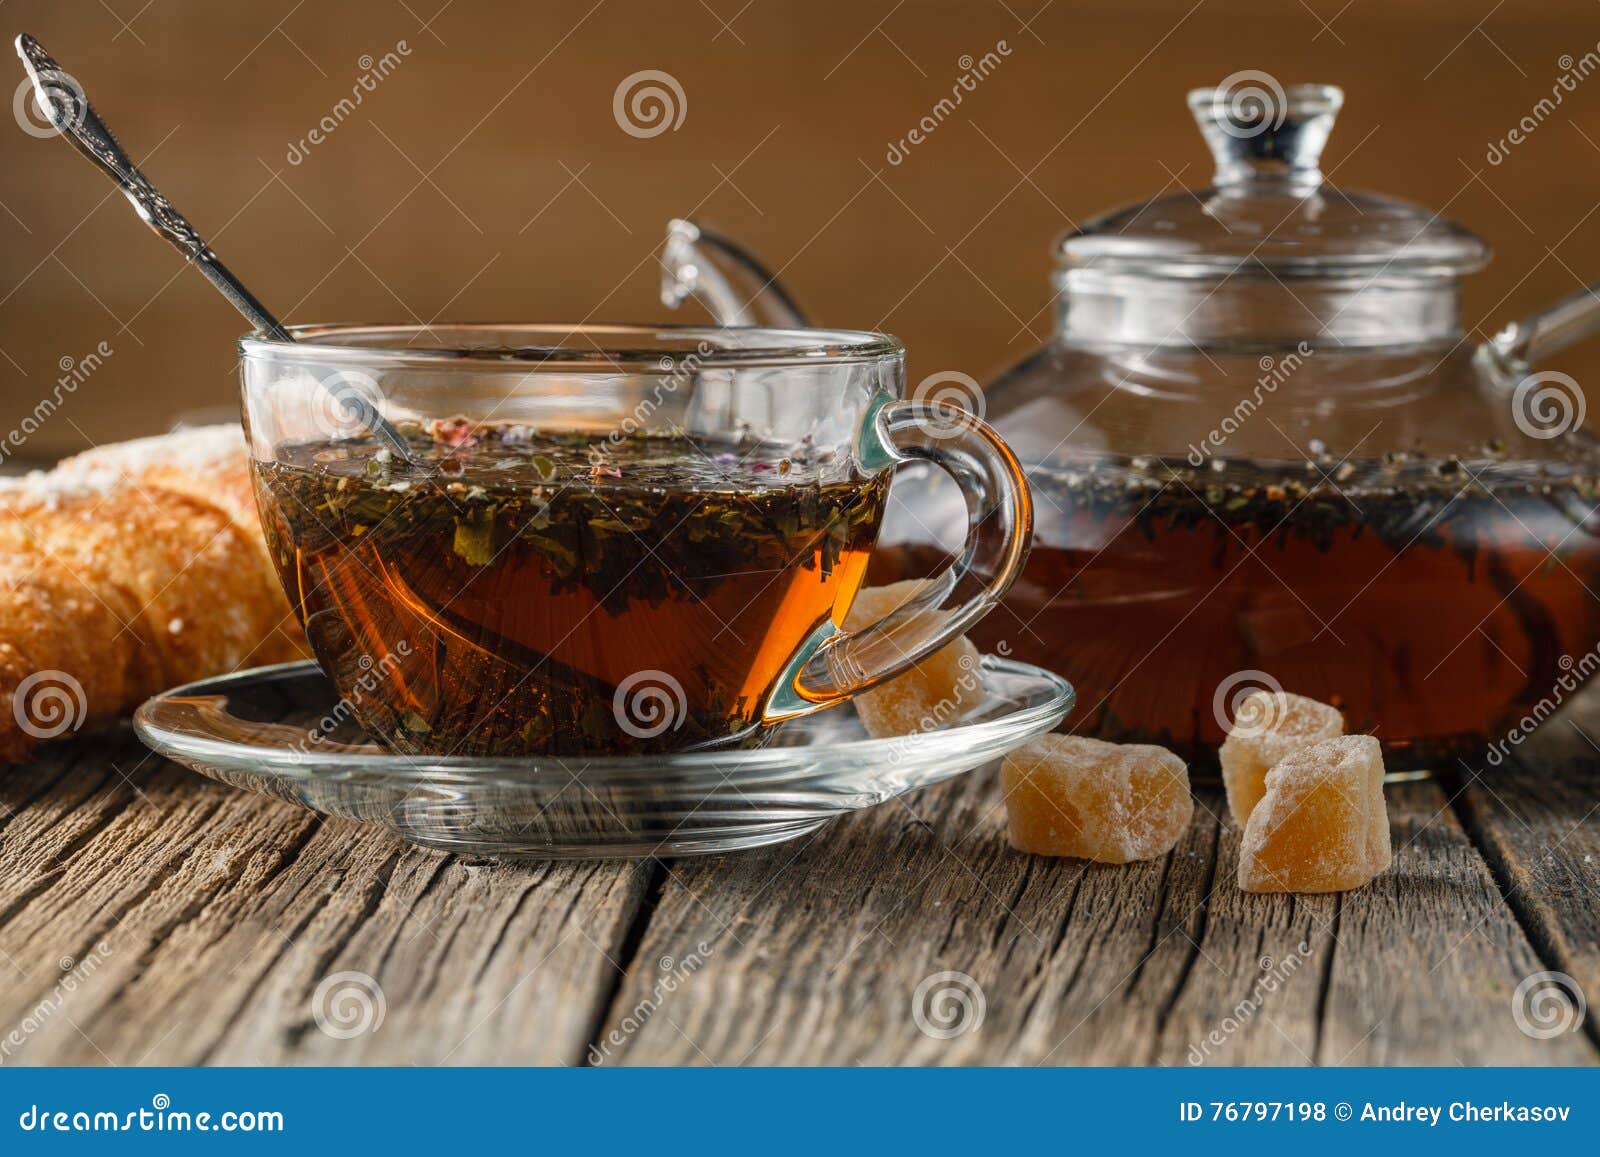 Glass teapot and cup with herbal tea on old wooden table